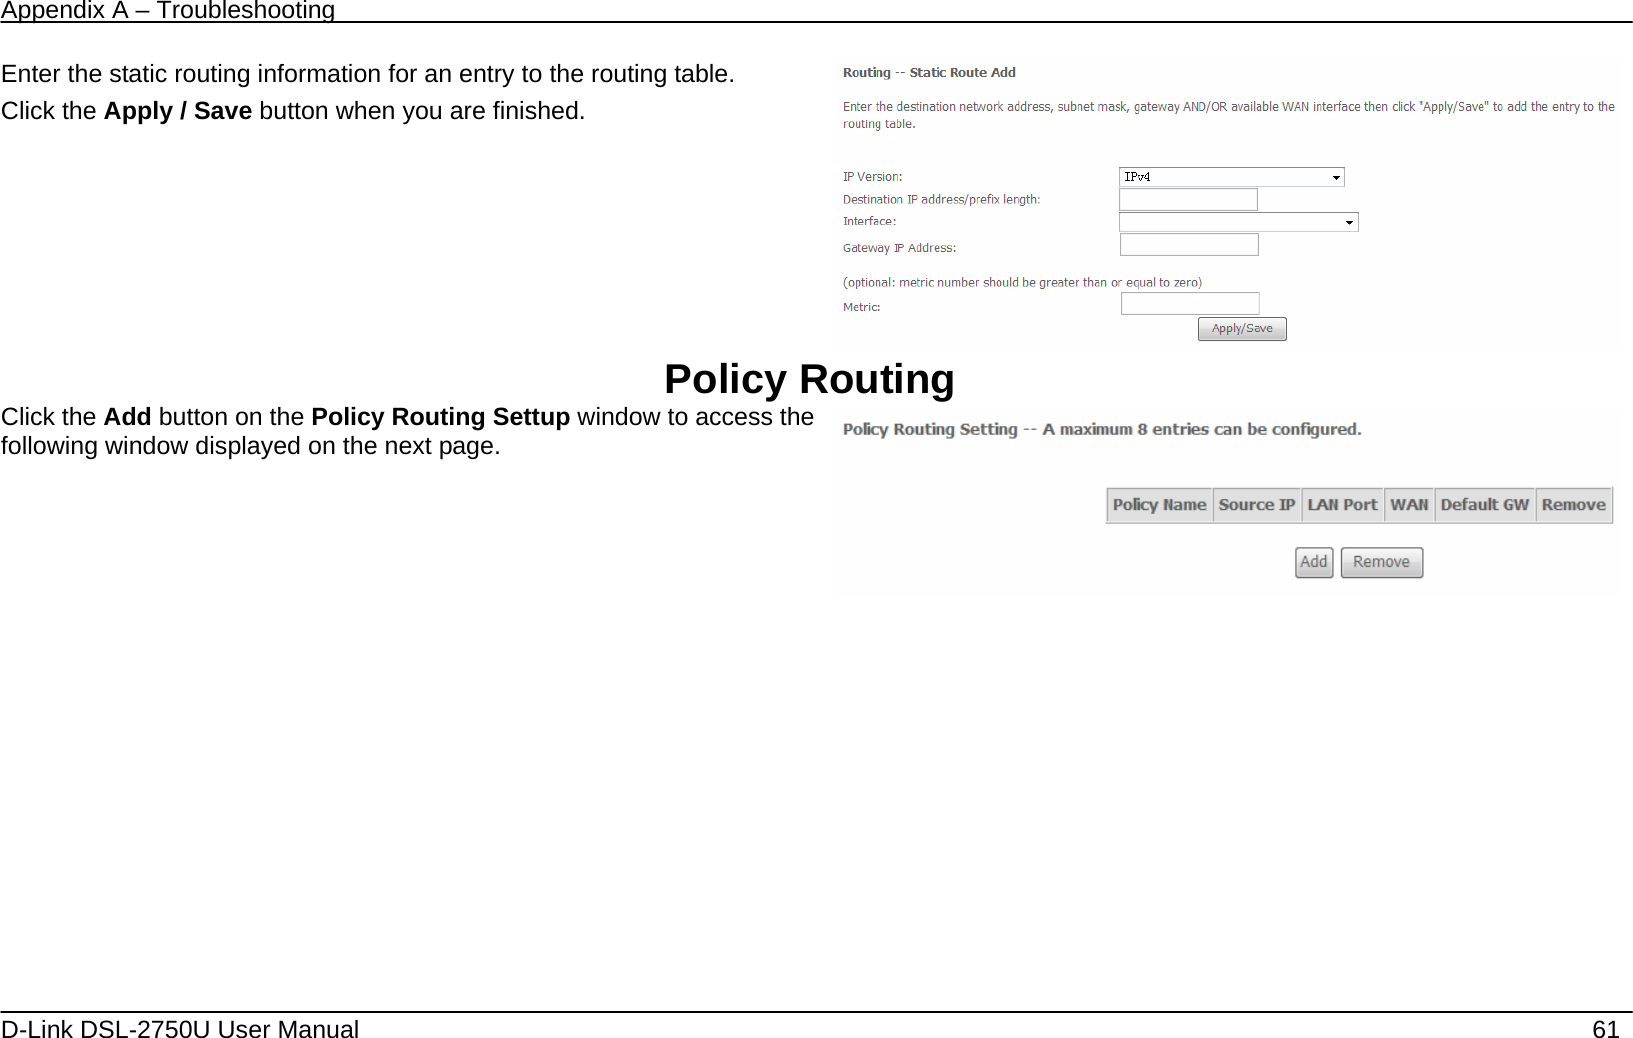 Appendix A – Troubleshooting   D-Link DSL-2750U User Manual    61 Enter the static routing information for an entry to the routing table. Click the Apply / Save button when you are finished.   Policy Routing Click the Add button on the Policy Routing Settup window to access the following window displayed on the next page.    